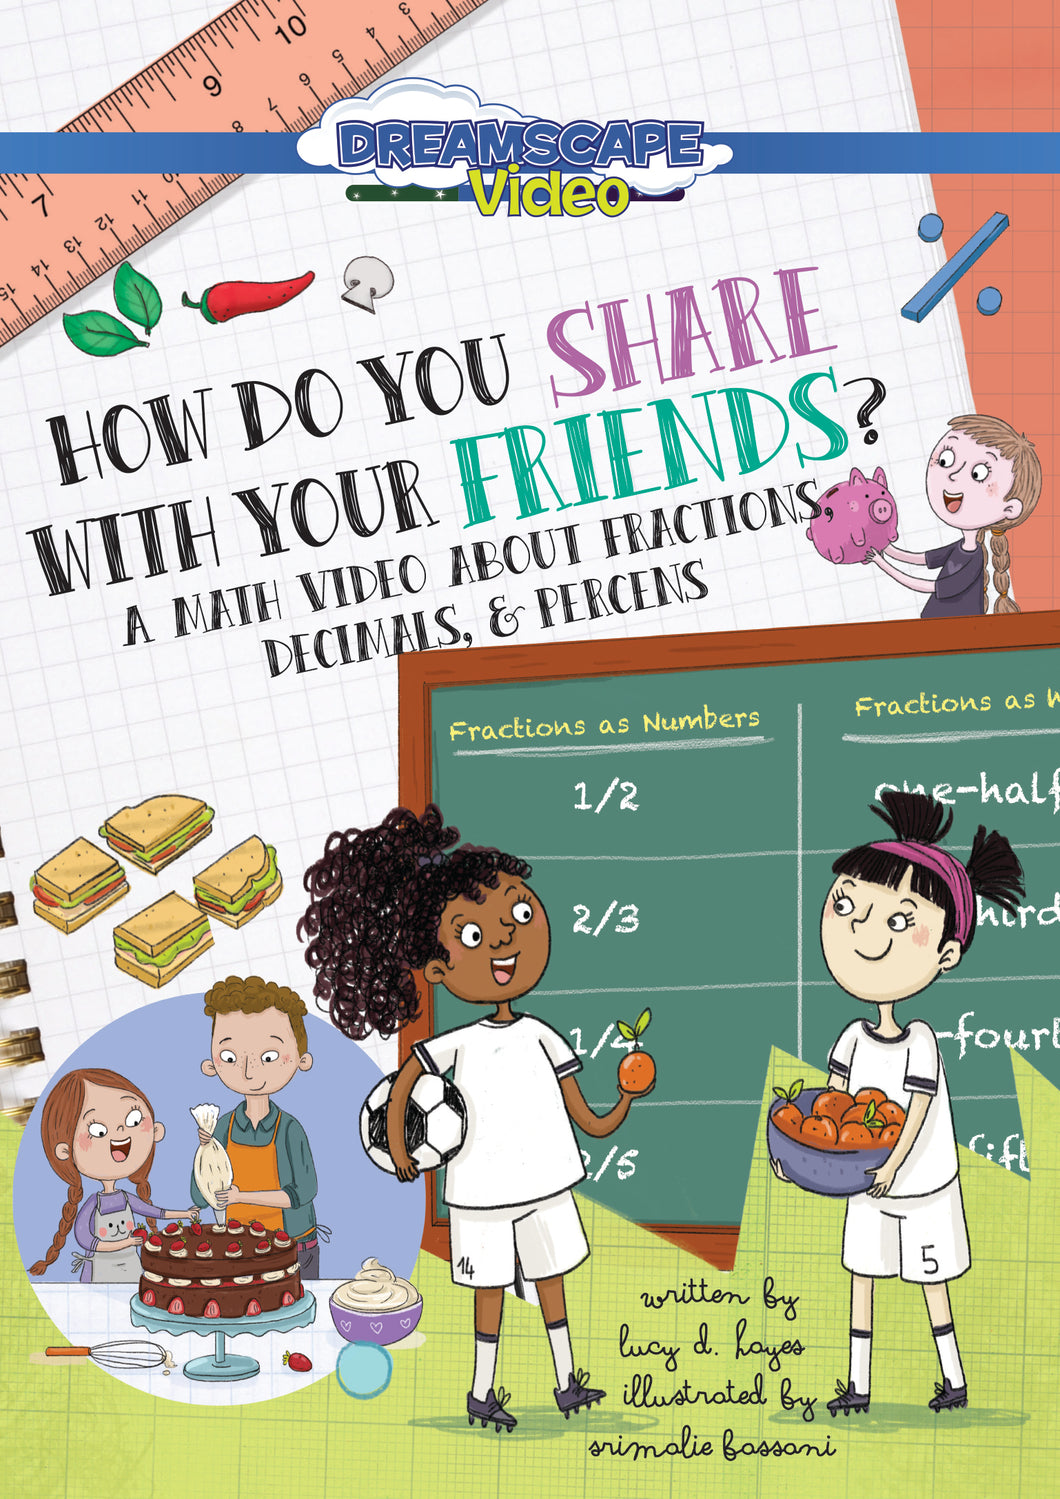 How Do You Share With Your Friends?: A Film About Fractions, Decimals, And Percentages (DVD)